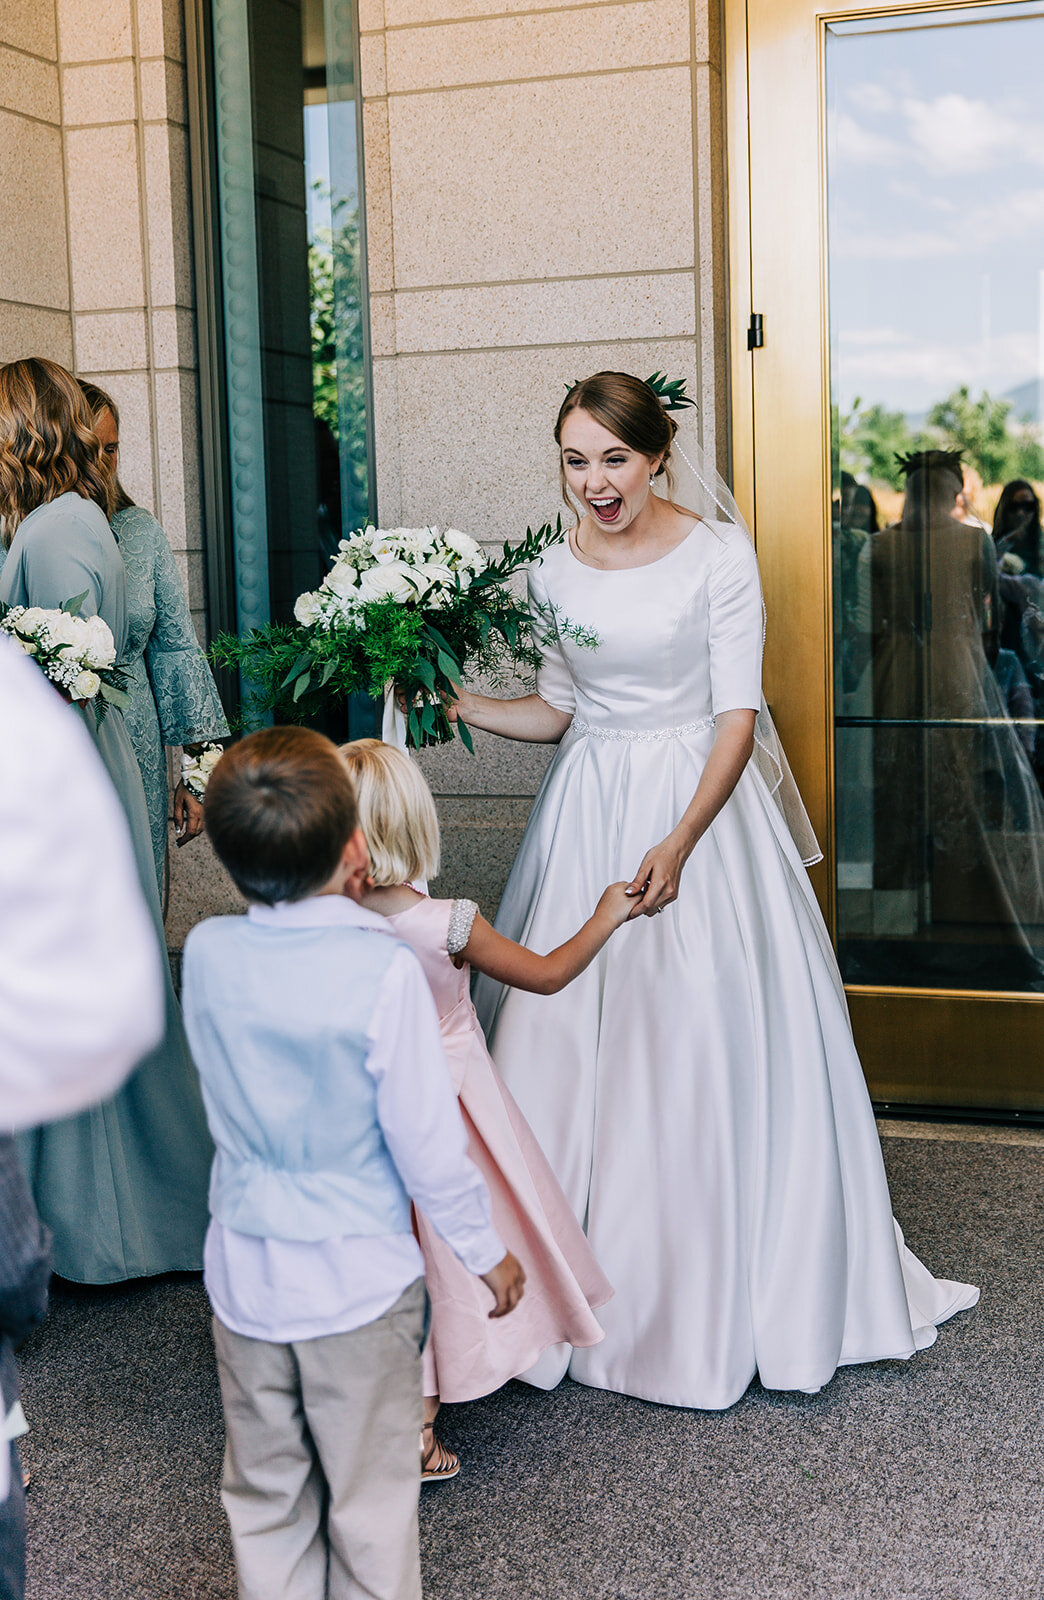  bride holding white floral bouquet wedding bouquet inspiration white and green flowers kids greeting the bride elbow-length sleeves wedding gown affordable wedding photographer salt lake city brides utah couples mormon brides lds wedding oquirrh mou